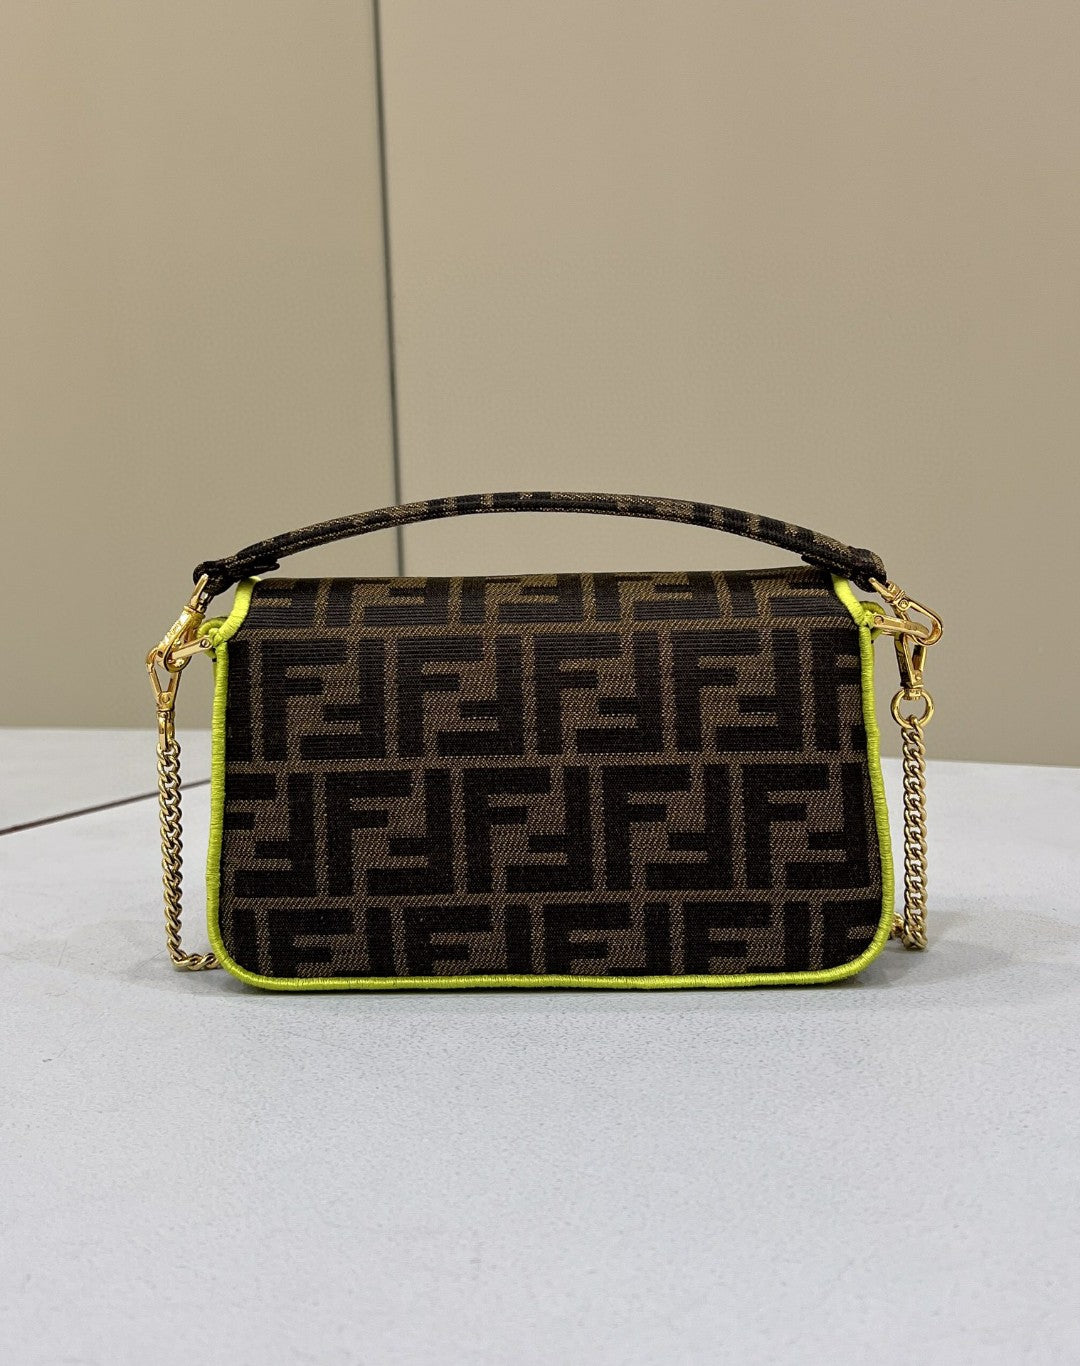 FI Baguette Small Brown Fabric Yellow Border Bag For Woman 18cm/7in